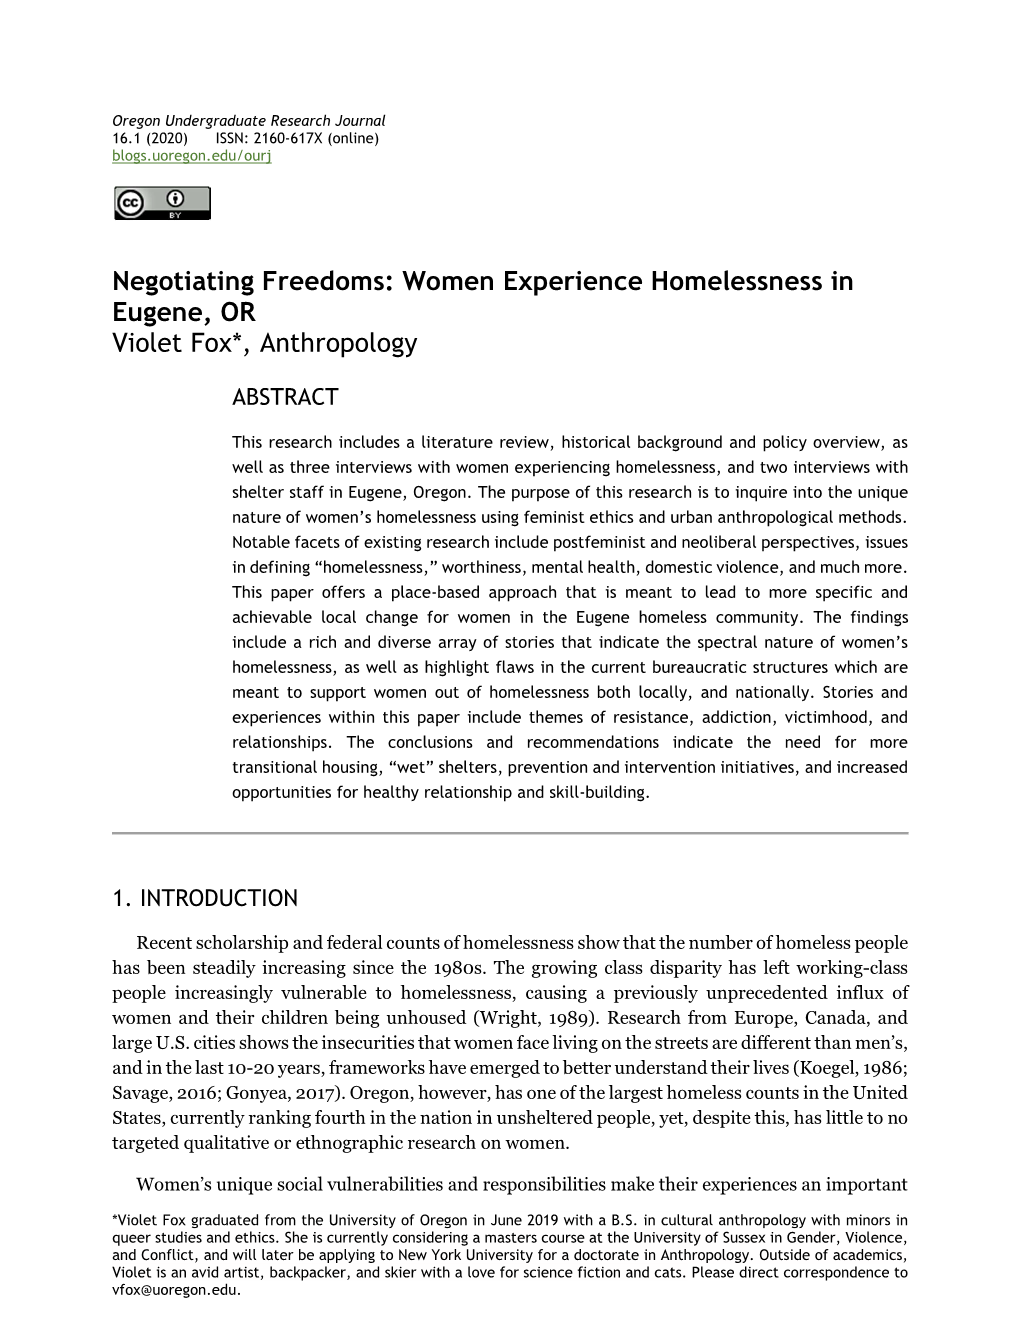 Negotiating Freedoms: Women Experience Homelessness in Eugene, OR Violet Fox*, Anthropology